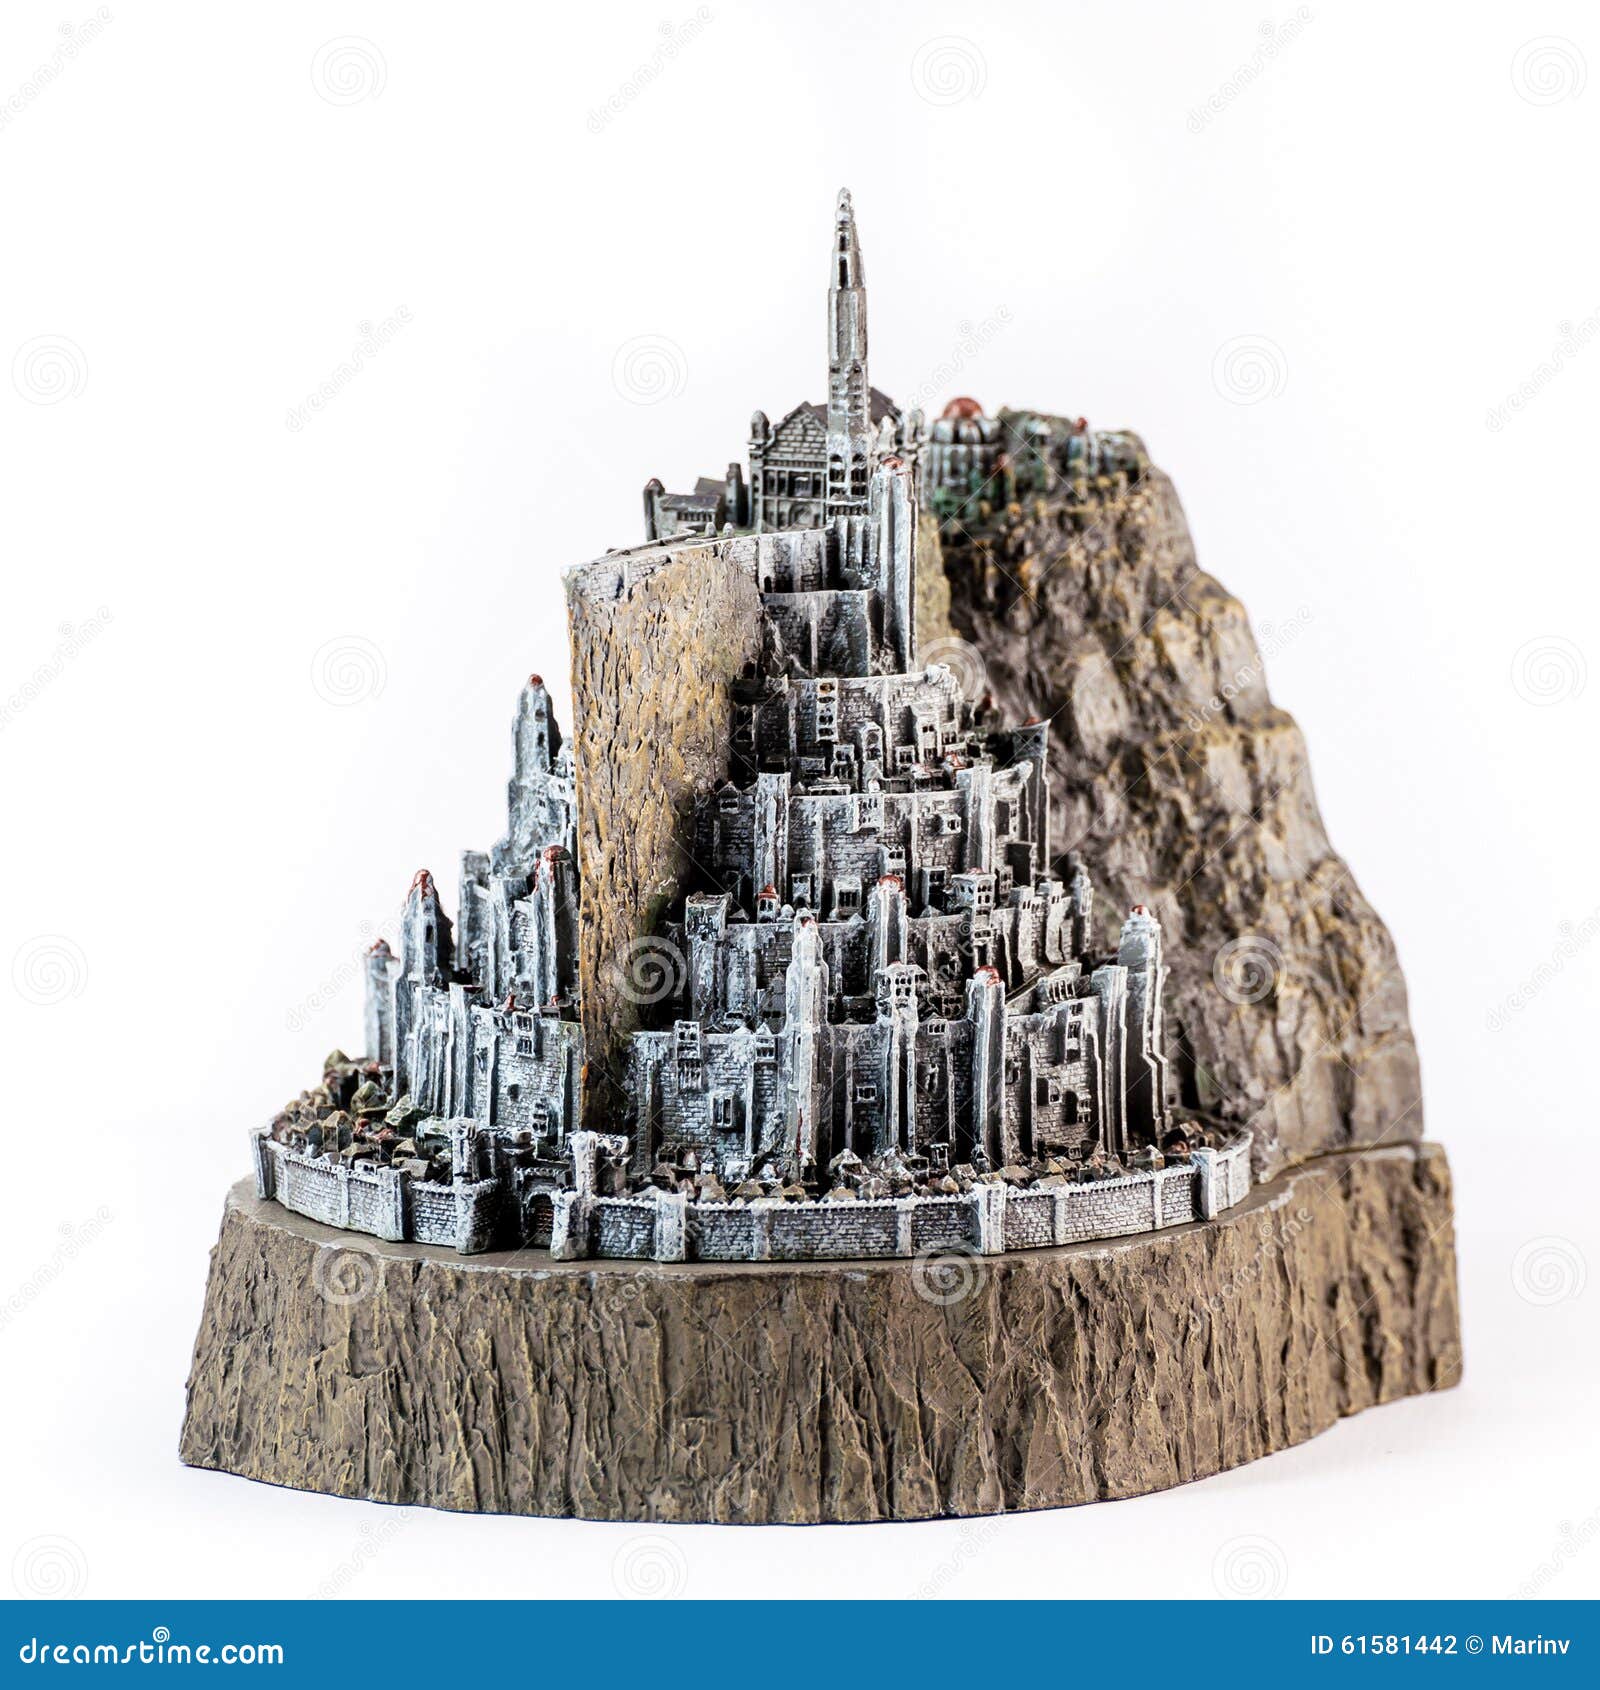 Lord of the Rings Figurine Showing the White City, Minas Tirith